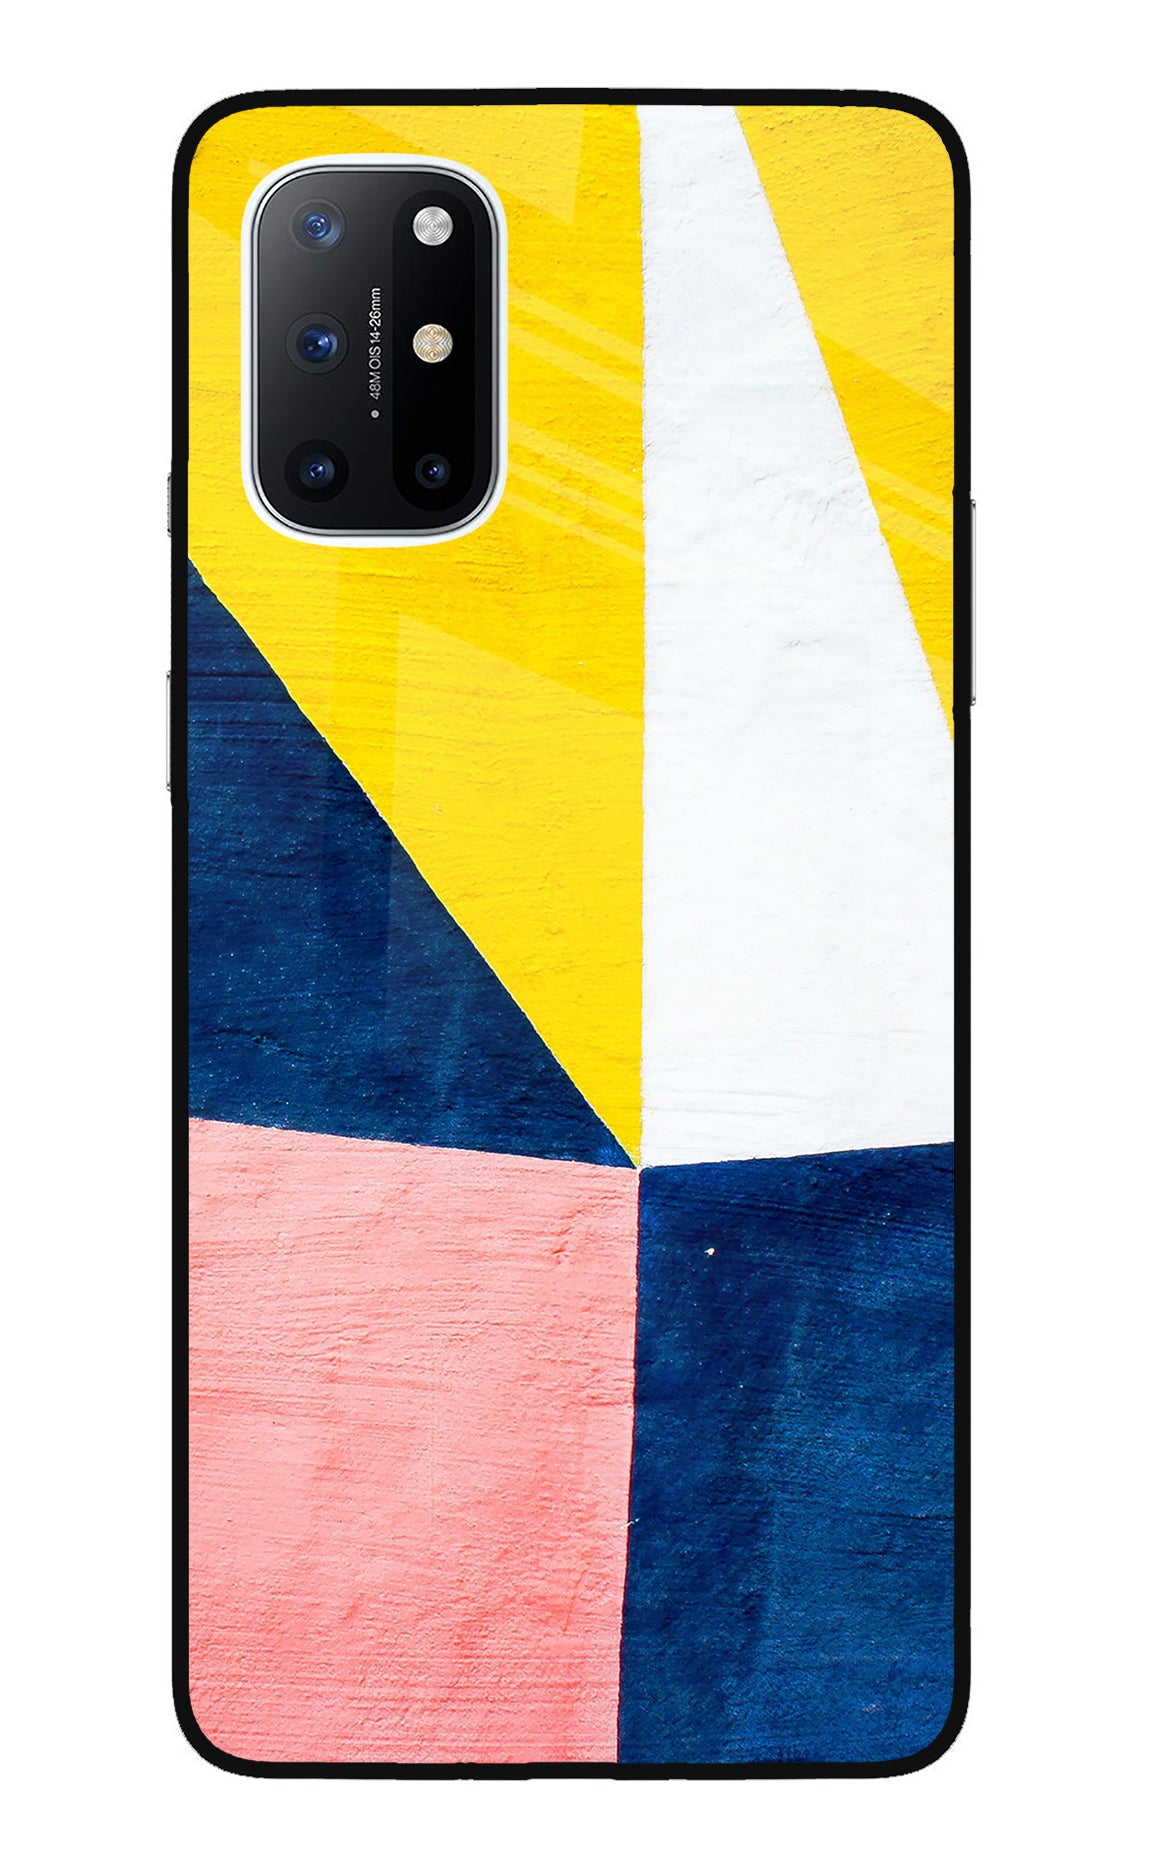 Colourful Art Oneplus 8T Back Cover